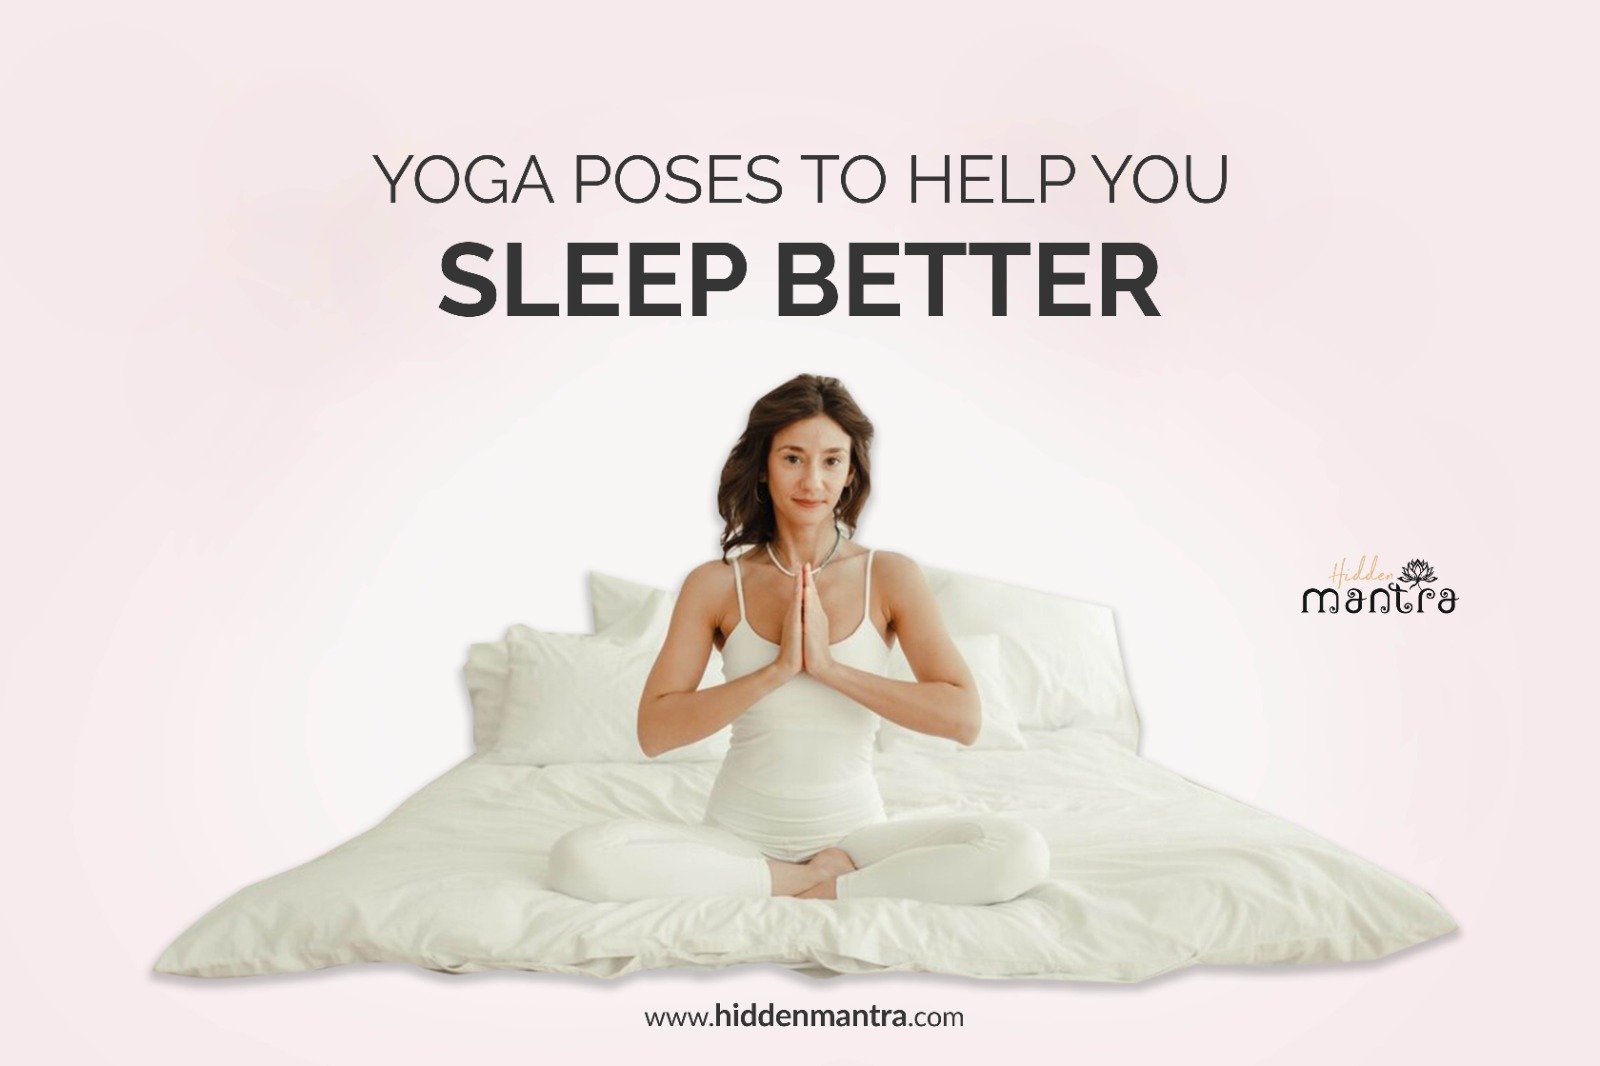 Yoga in Bed - 7 Poses for Upper Body Mobility — YOGABYCANDACE